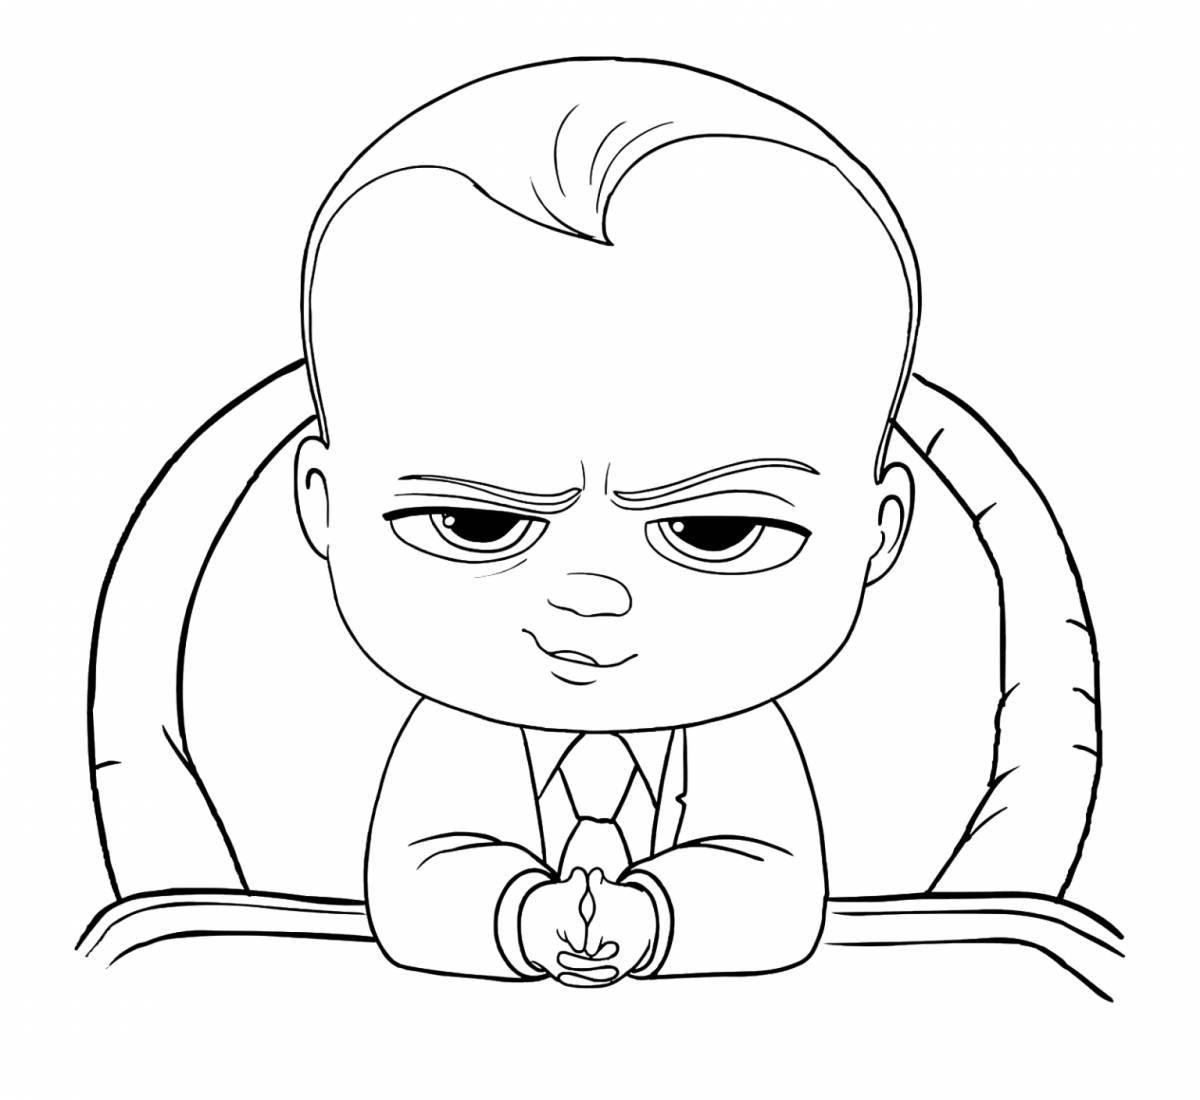 Charan baby animated coloring page